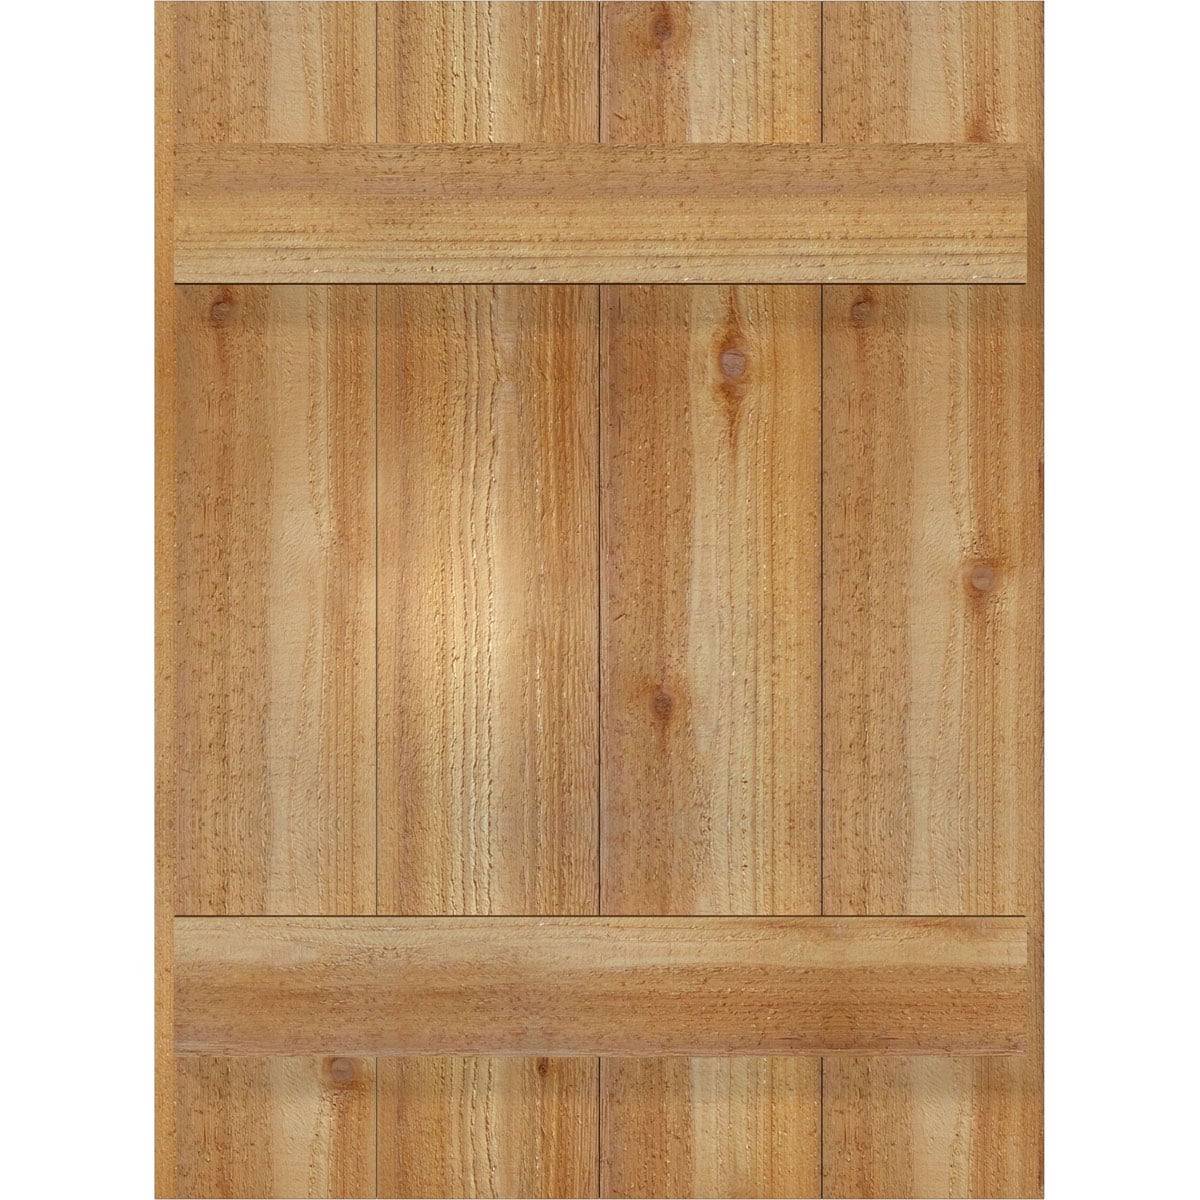 Ekena Millwork 2-Pack 21.5-in W x 29-in H Unfinished Board and Batten Wood Western Red cedar Exterior Shutters